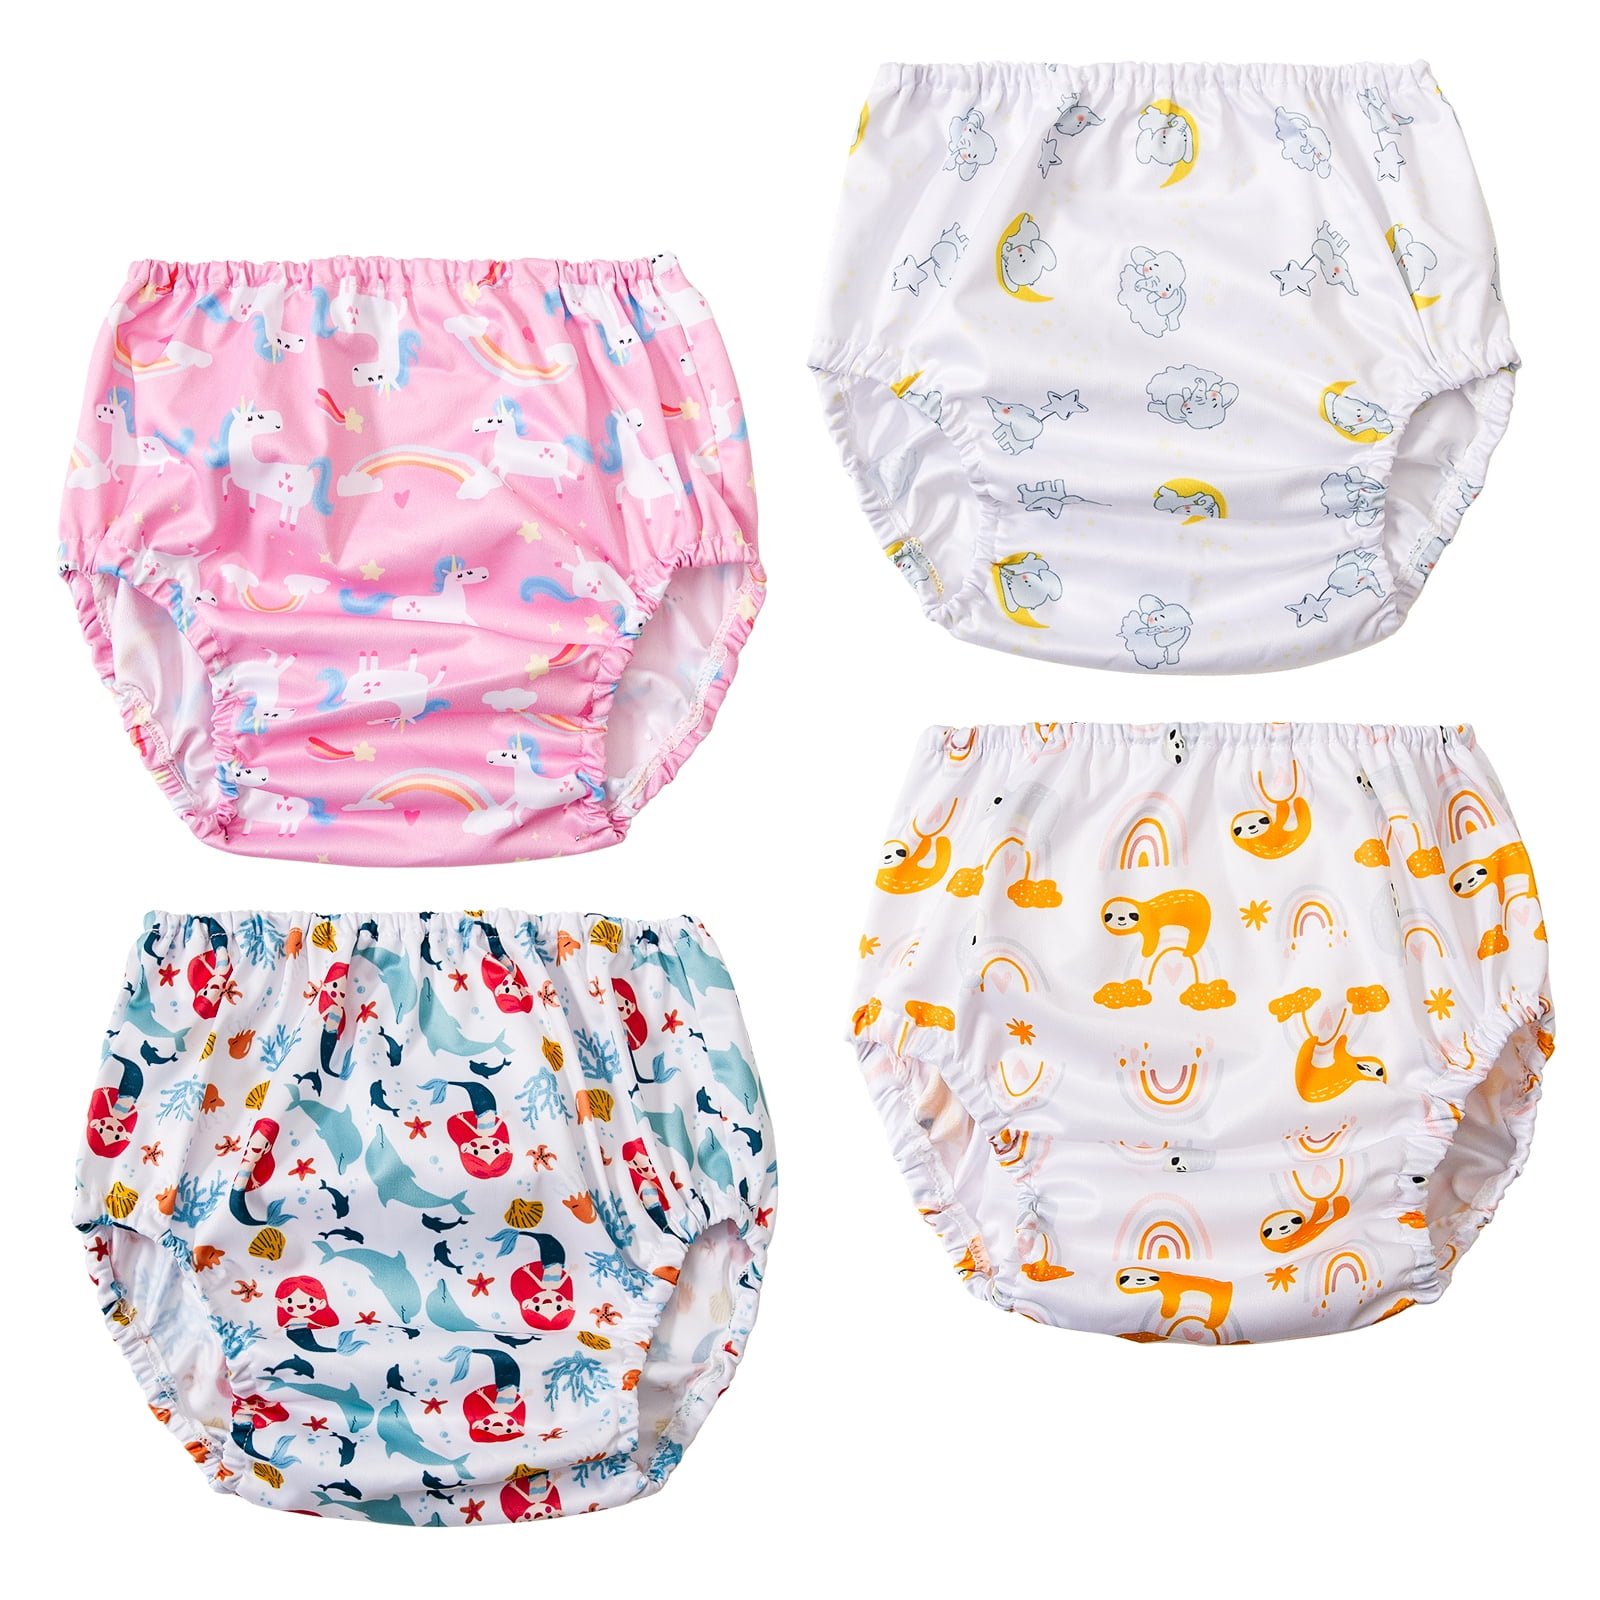 Plastic Underwear Covers for Potty Training Underwear for Girls